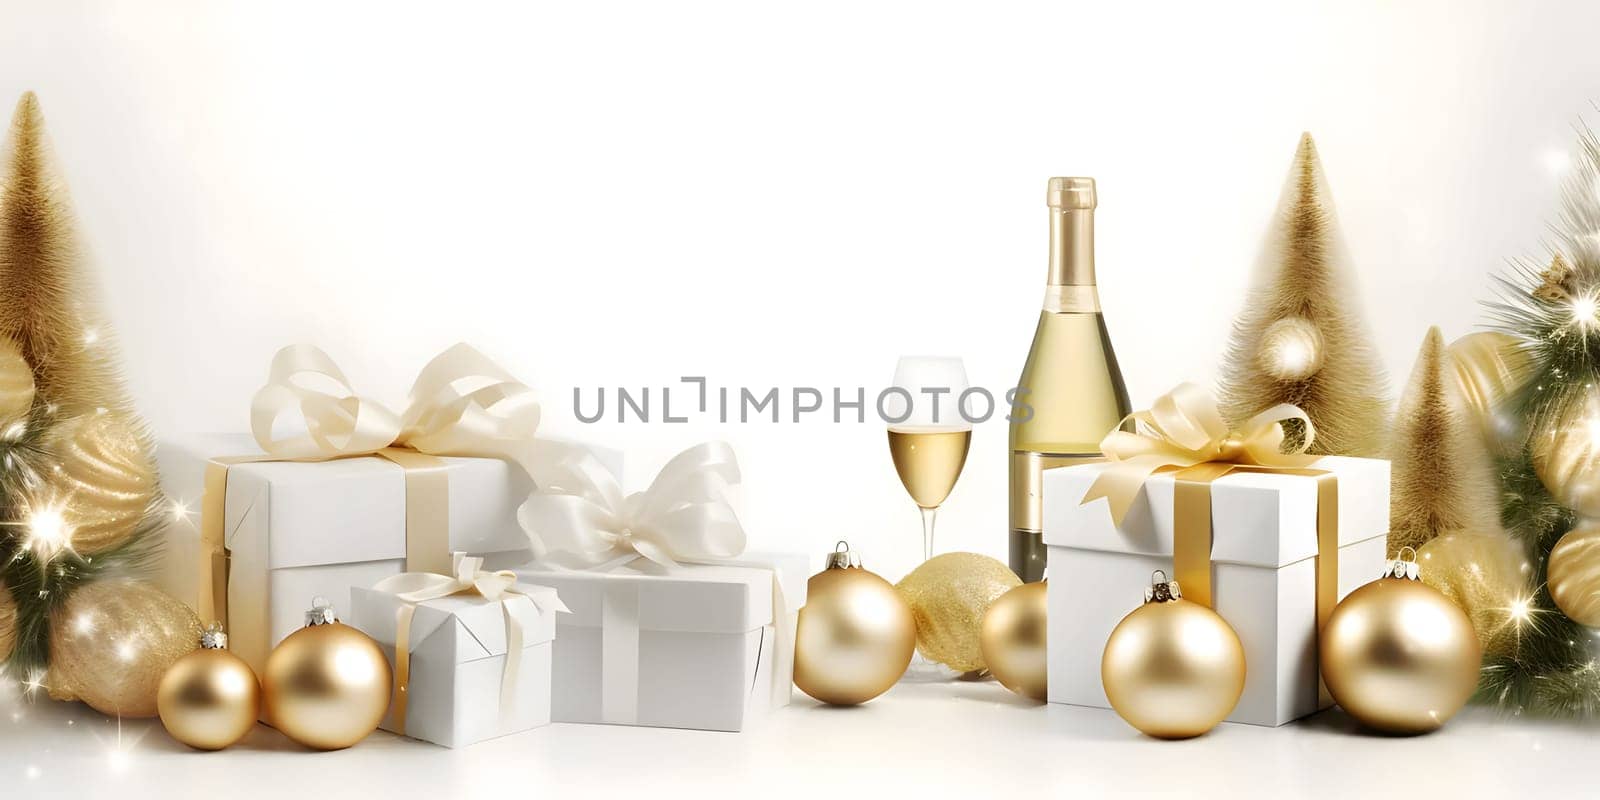 Christmas trees with gold baubles, gifts with gold bows, champagne bottle and glass. Bright background, banner with space for your own content. Blank space for the inscription.